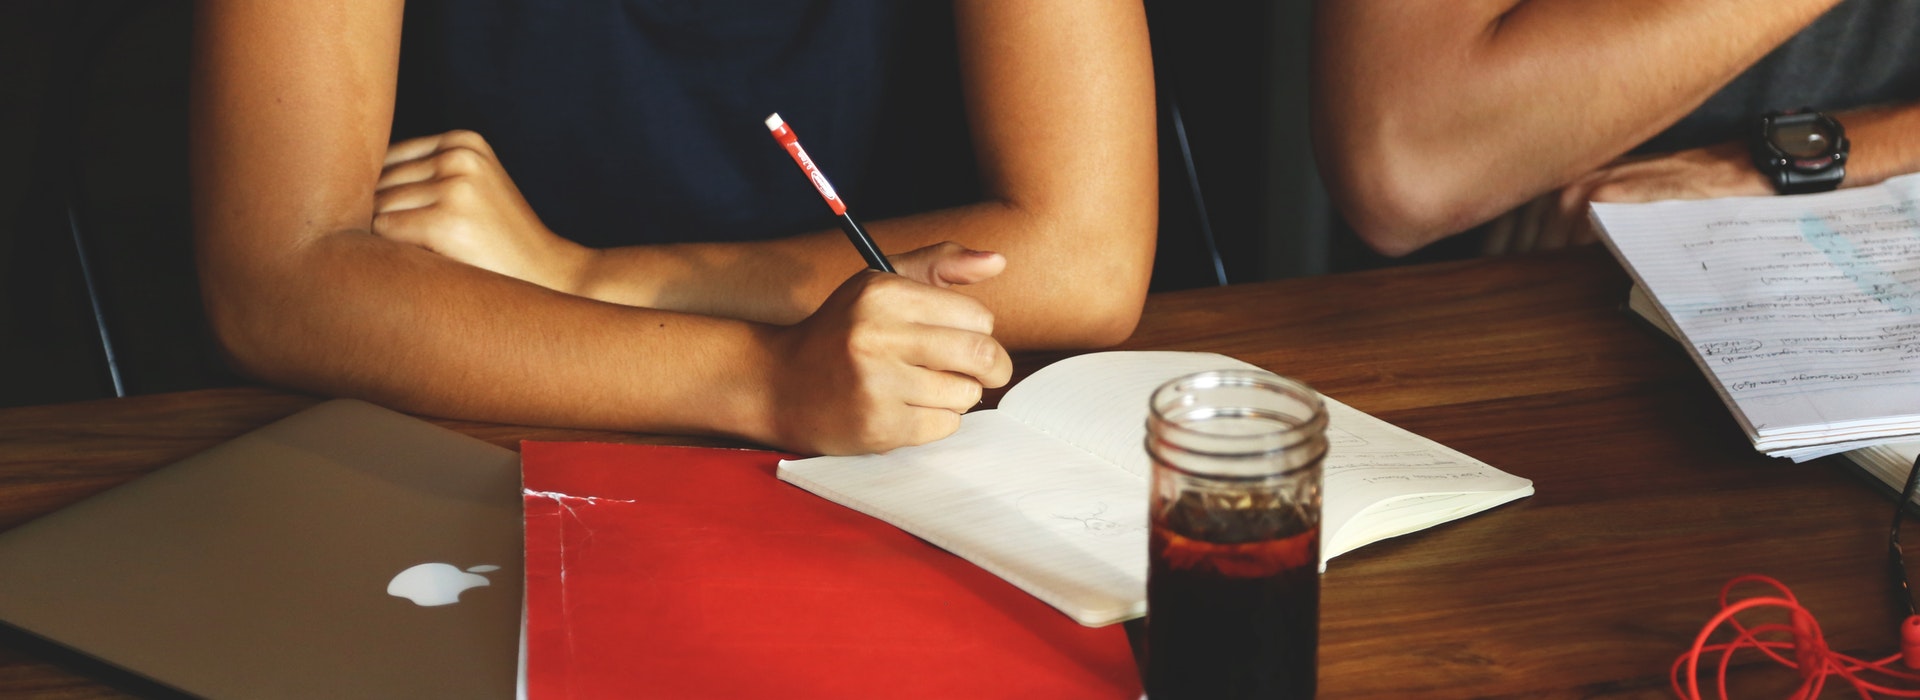 Closeup photo of a woman writing in a red notebook on a desk with a cup of coffee in front of her